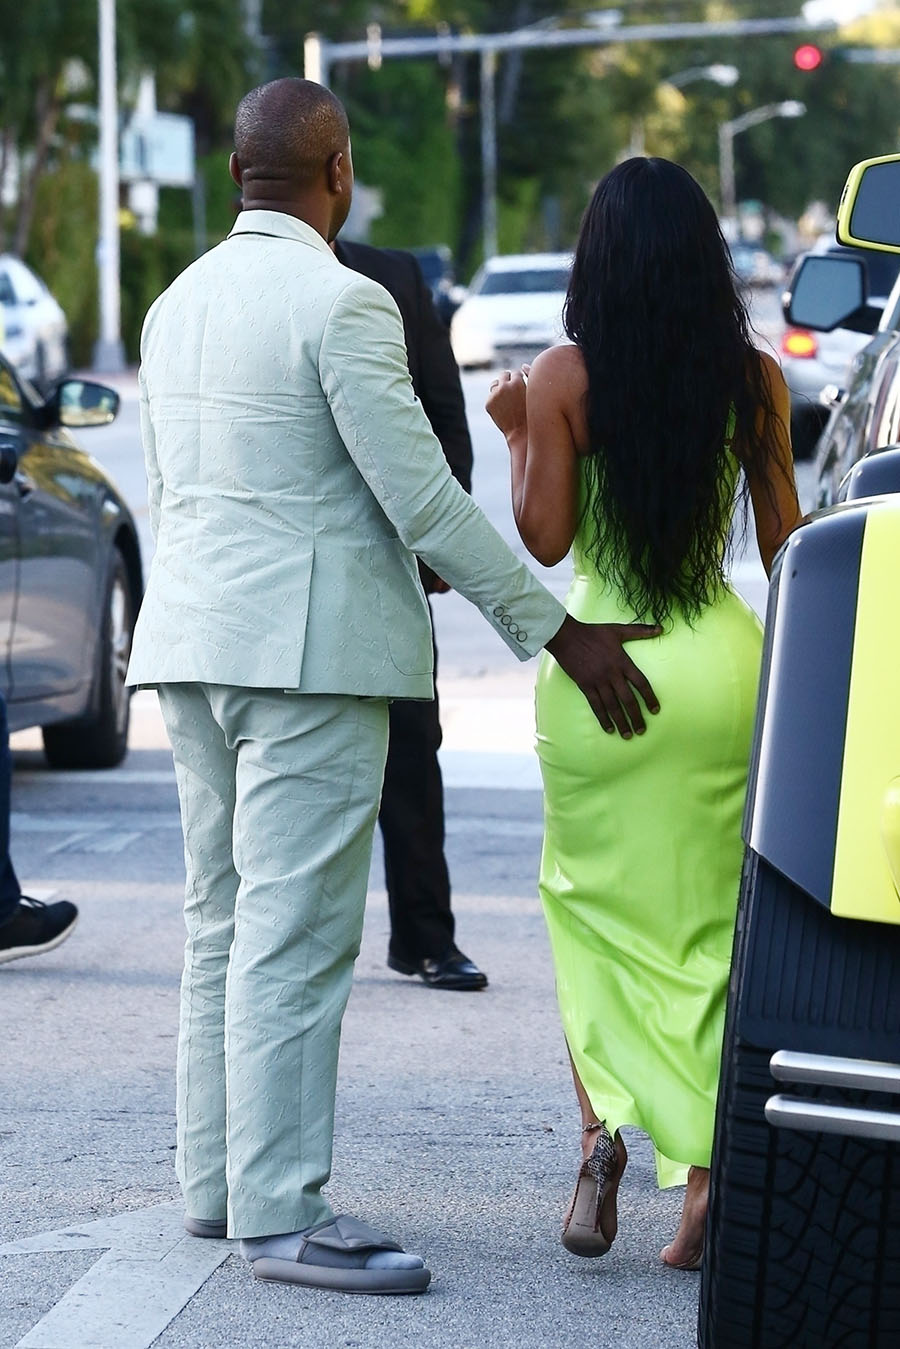 Kim Kardashian gets a helping hand from her man Kanye West while they